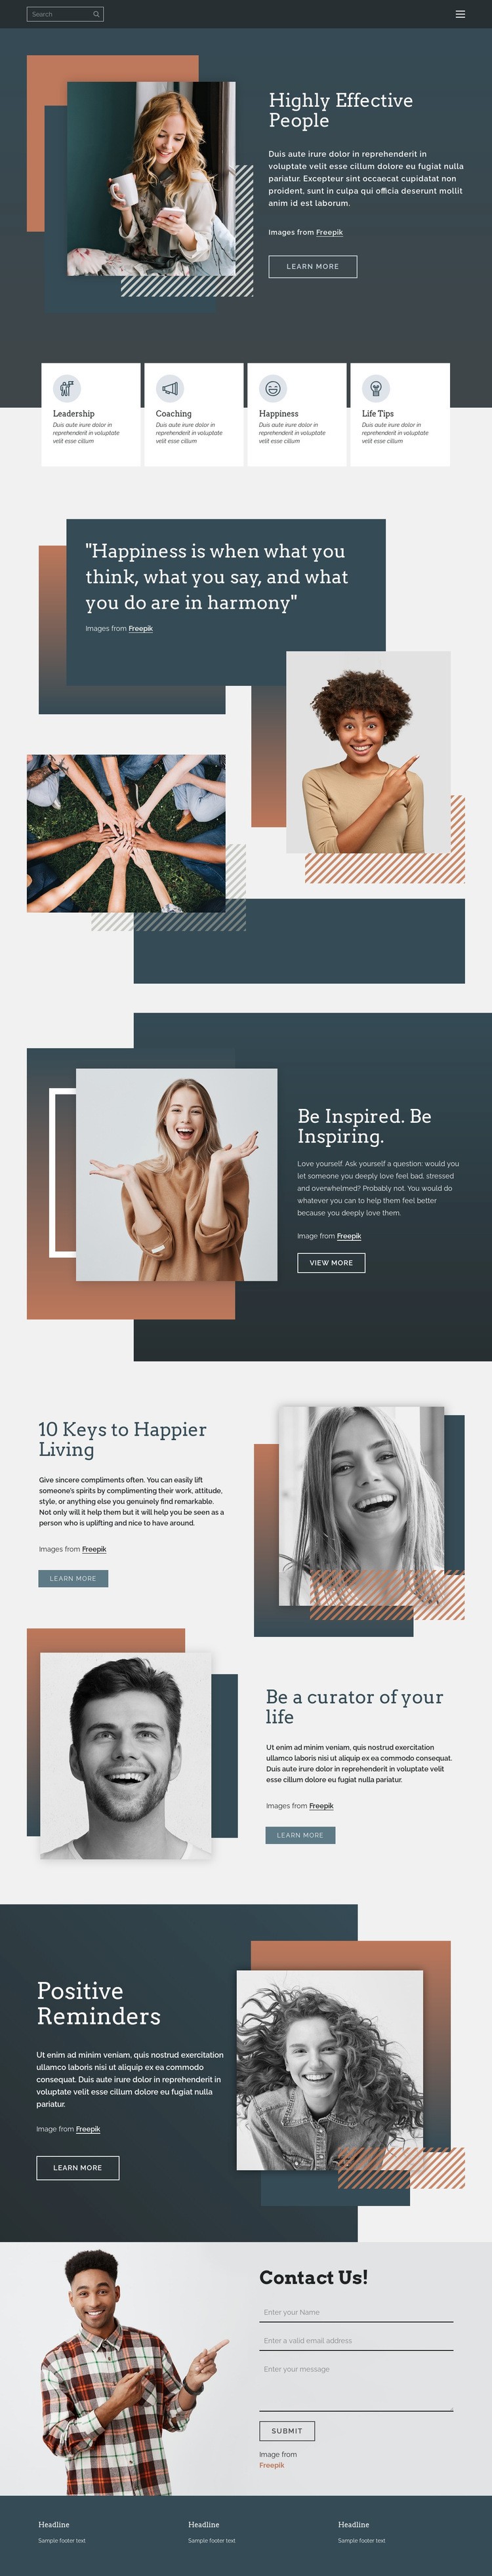 How to be successful in life Homepage Design